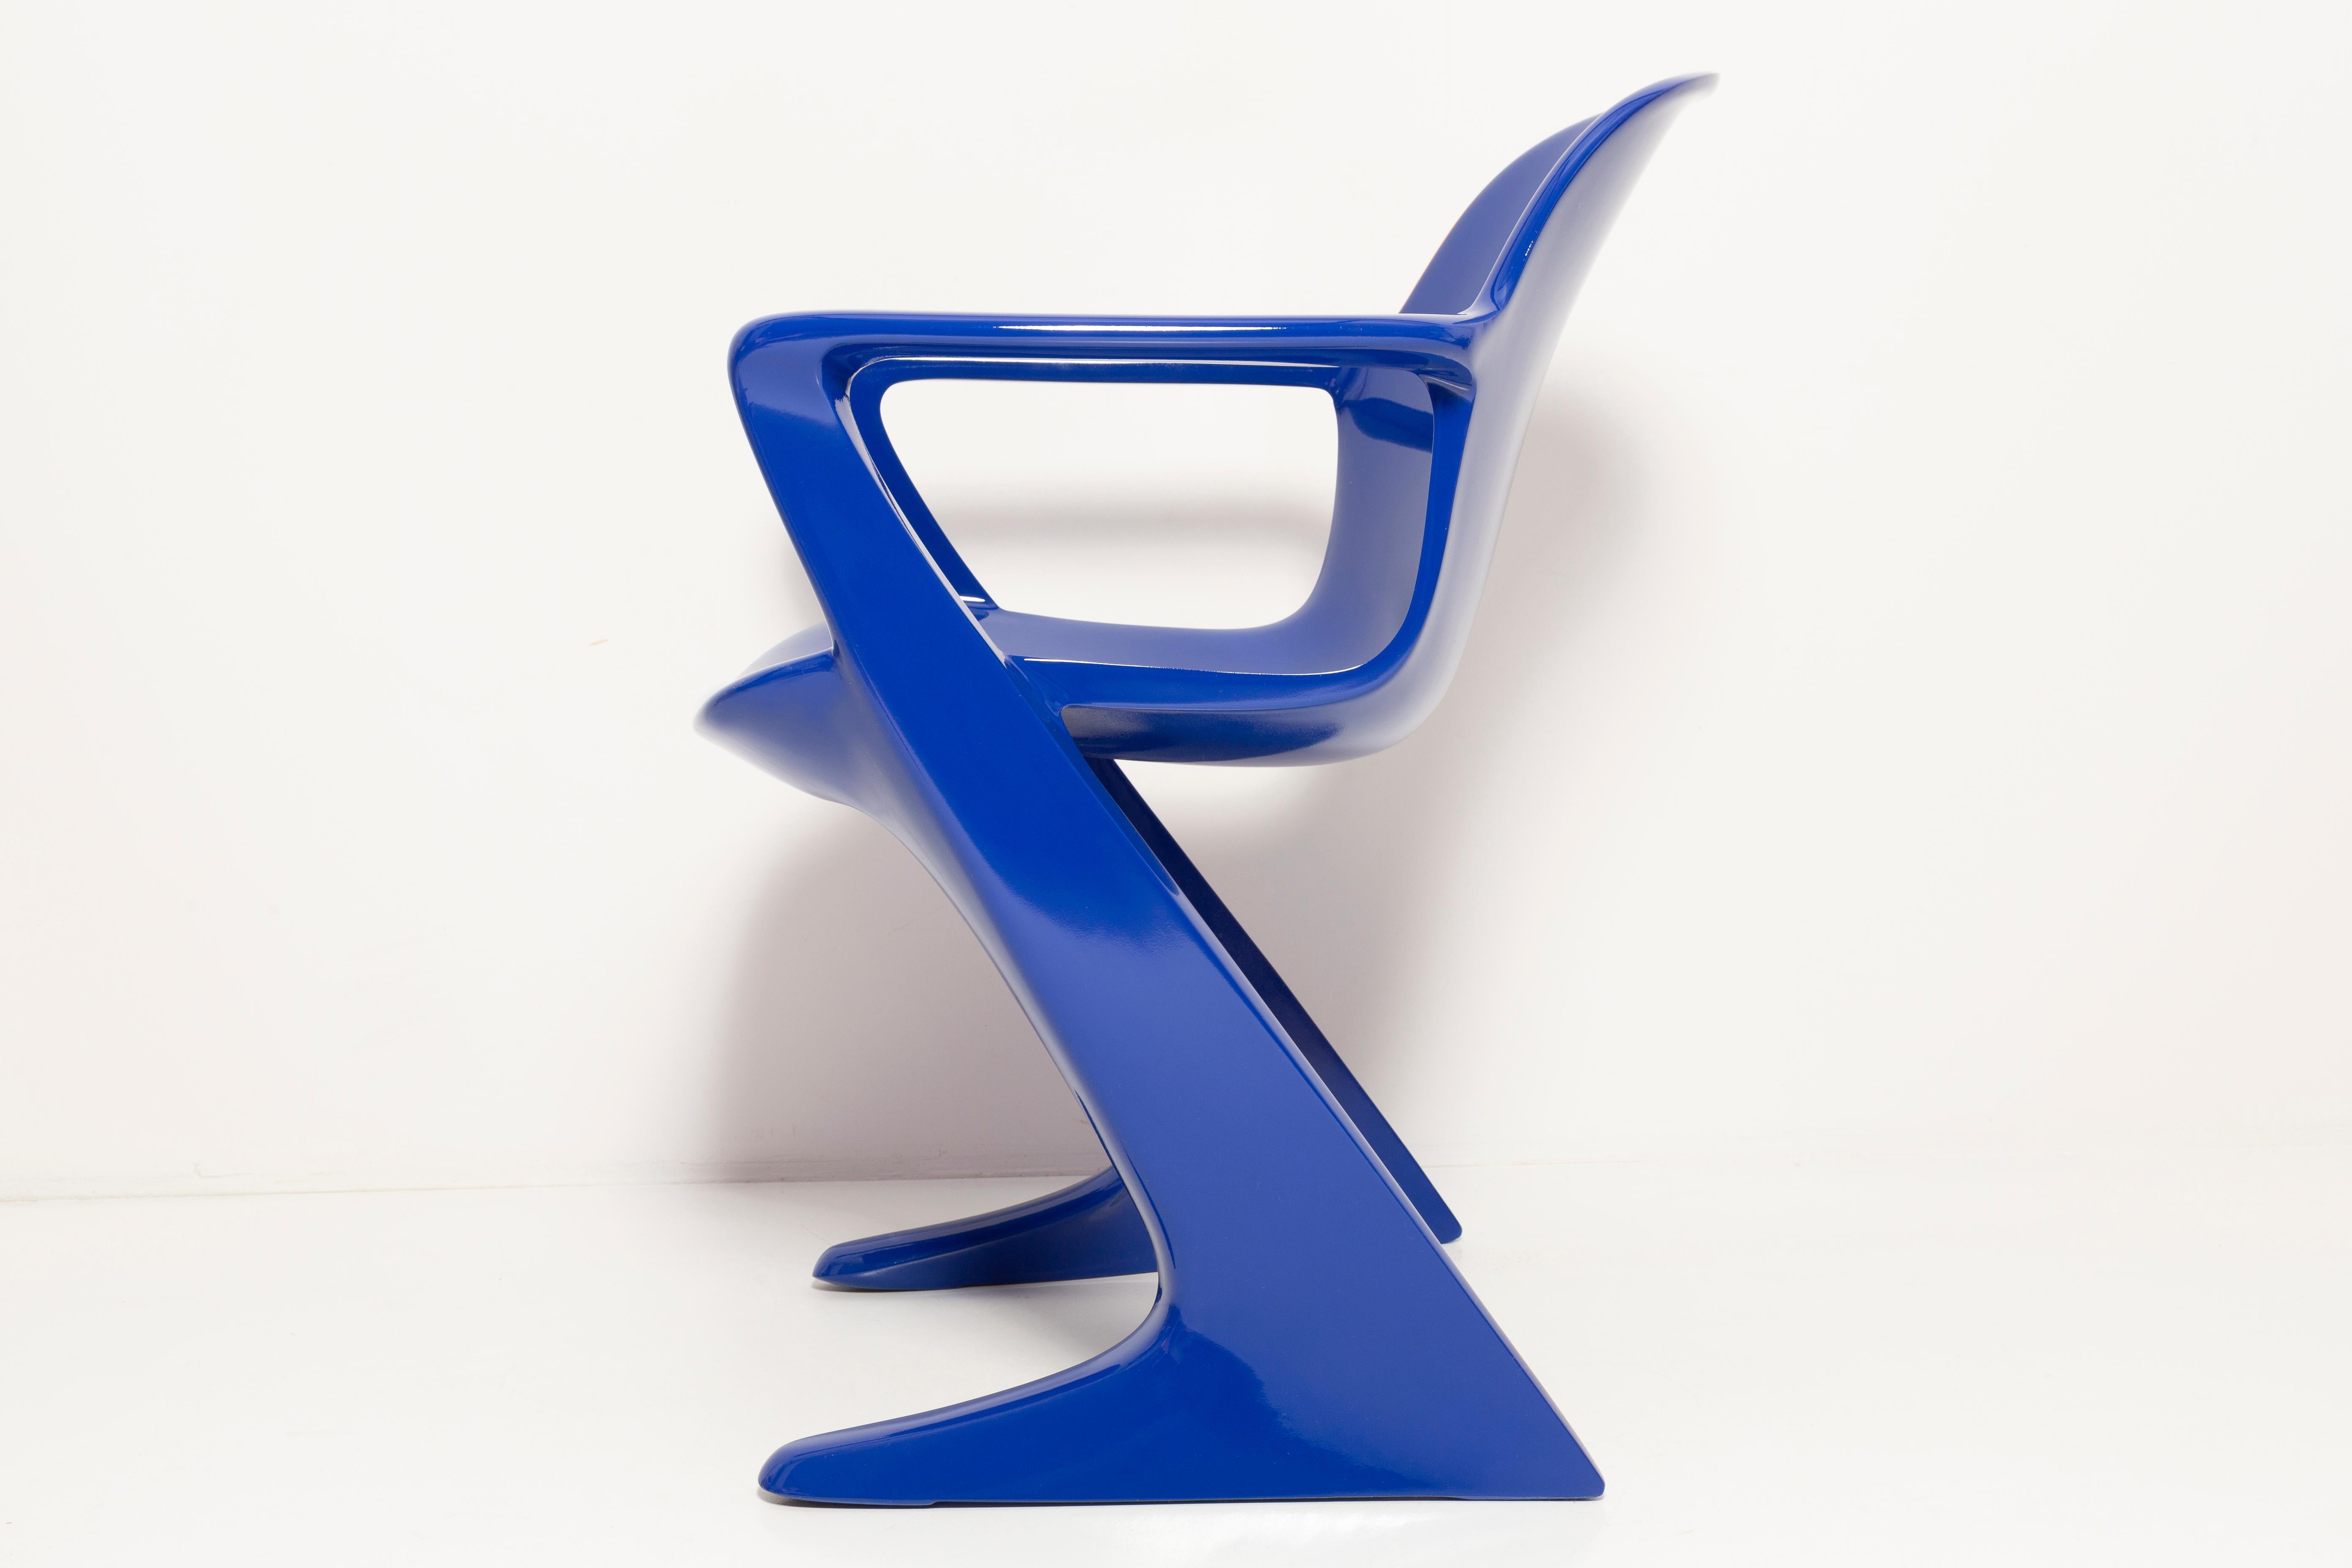 Lacquered Ultramarine Blue Kangaroo Chair Designed by Ernst Moeckl, Germany, 1968 For Sale